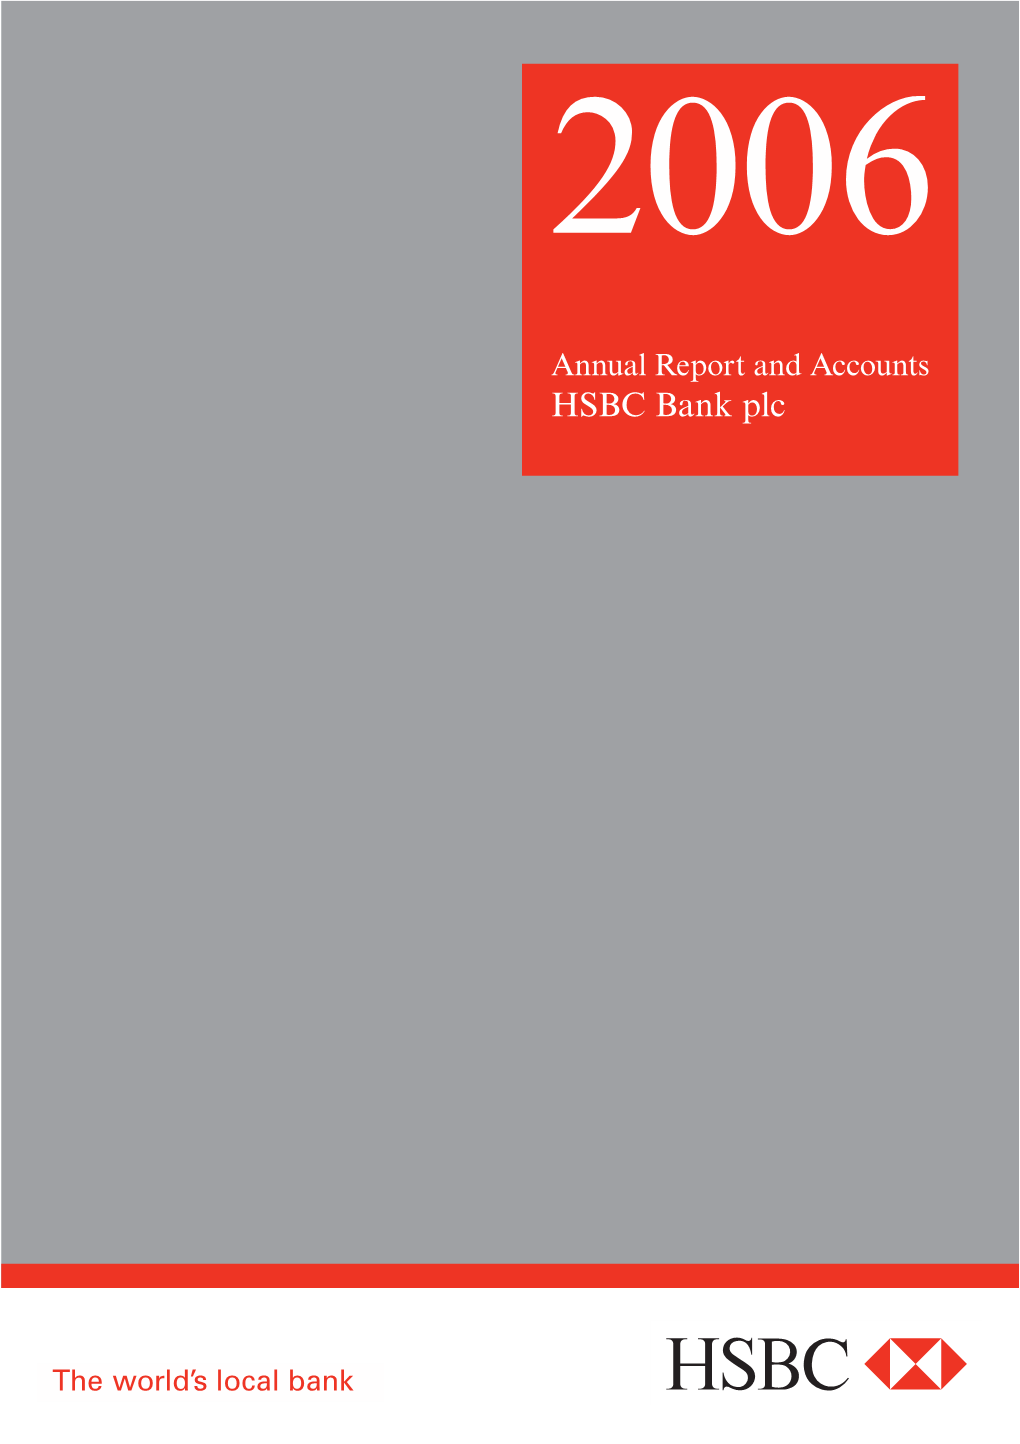 HSBC Bank Plc Annual Report and Accounts 2006